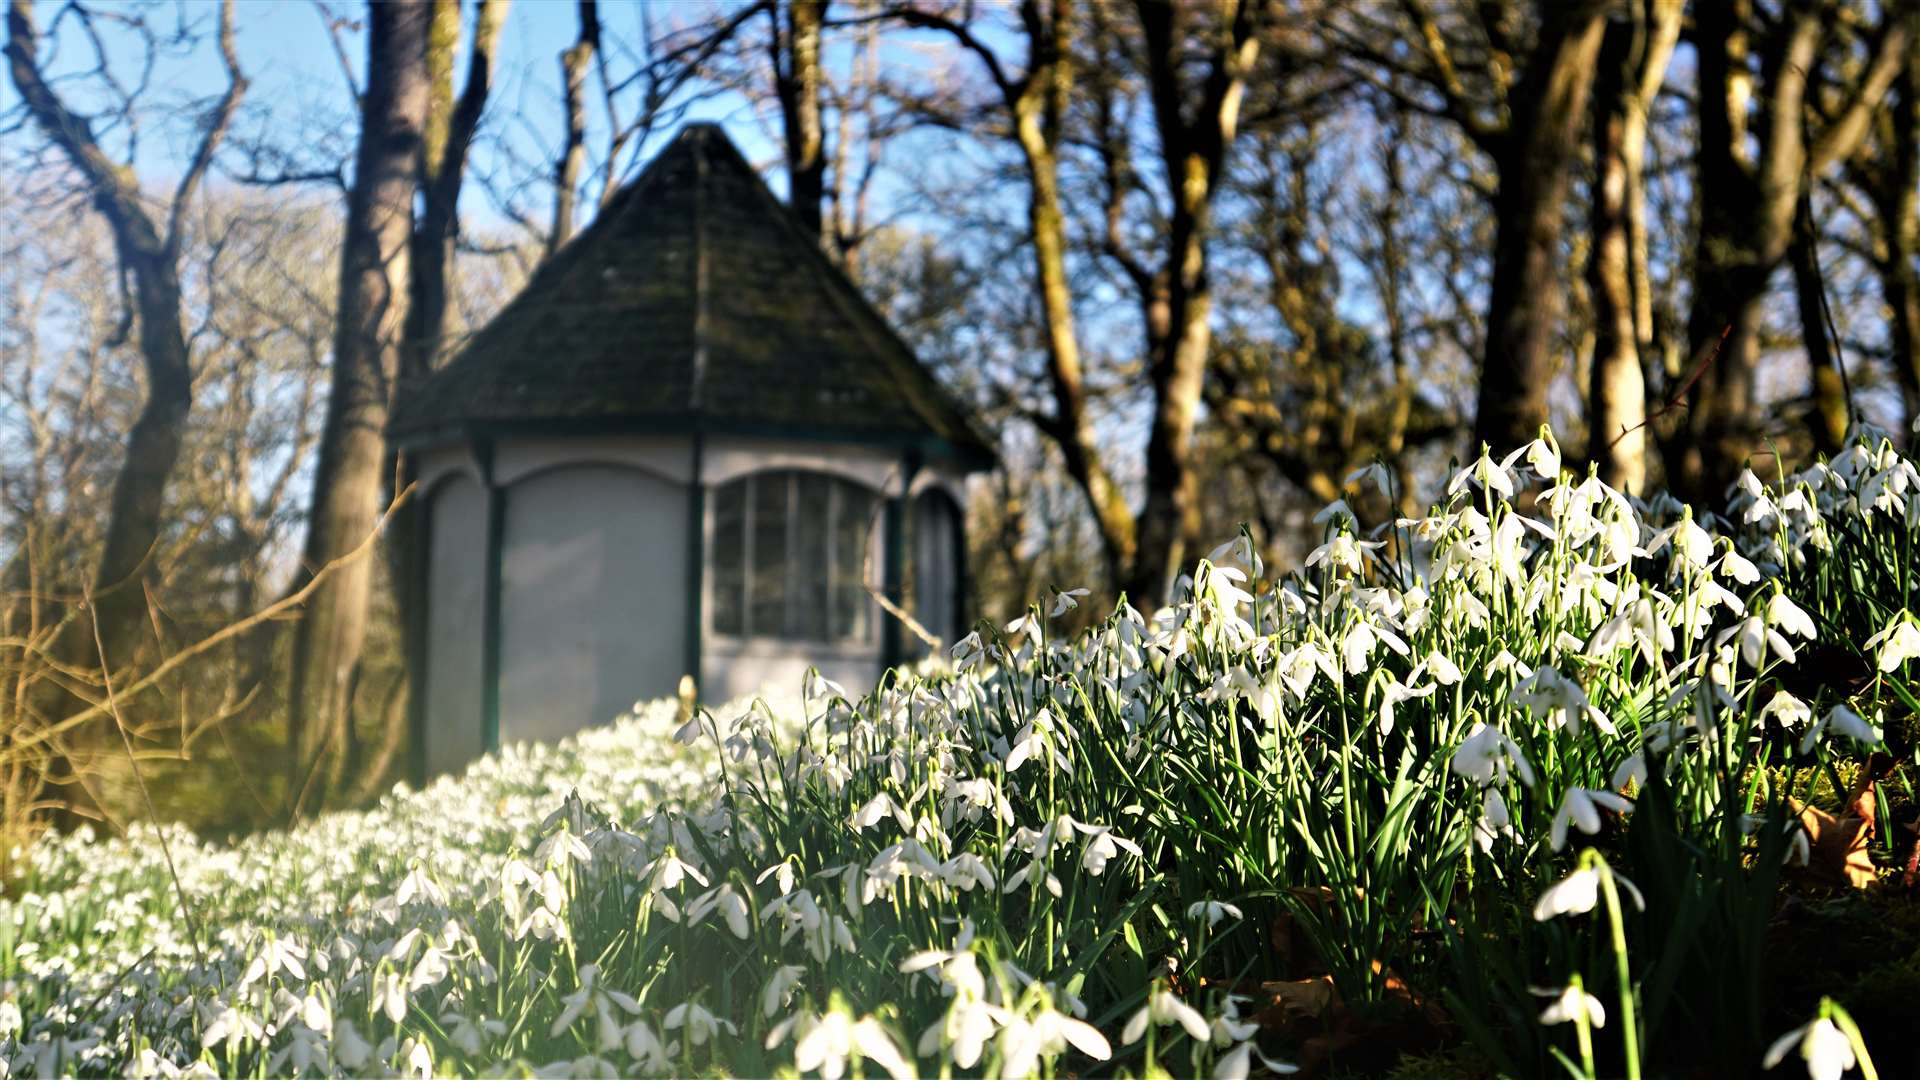 The snowdrops were resplendent in the sunshine. Picture: DGS